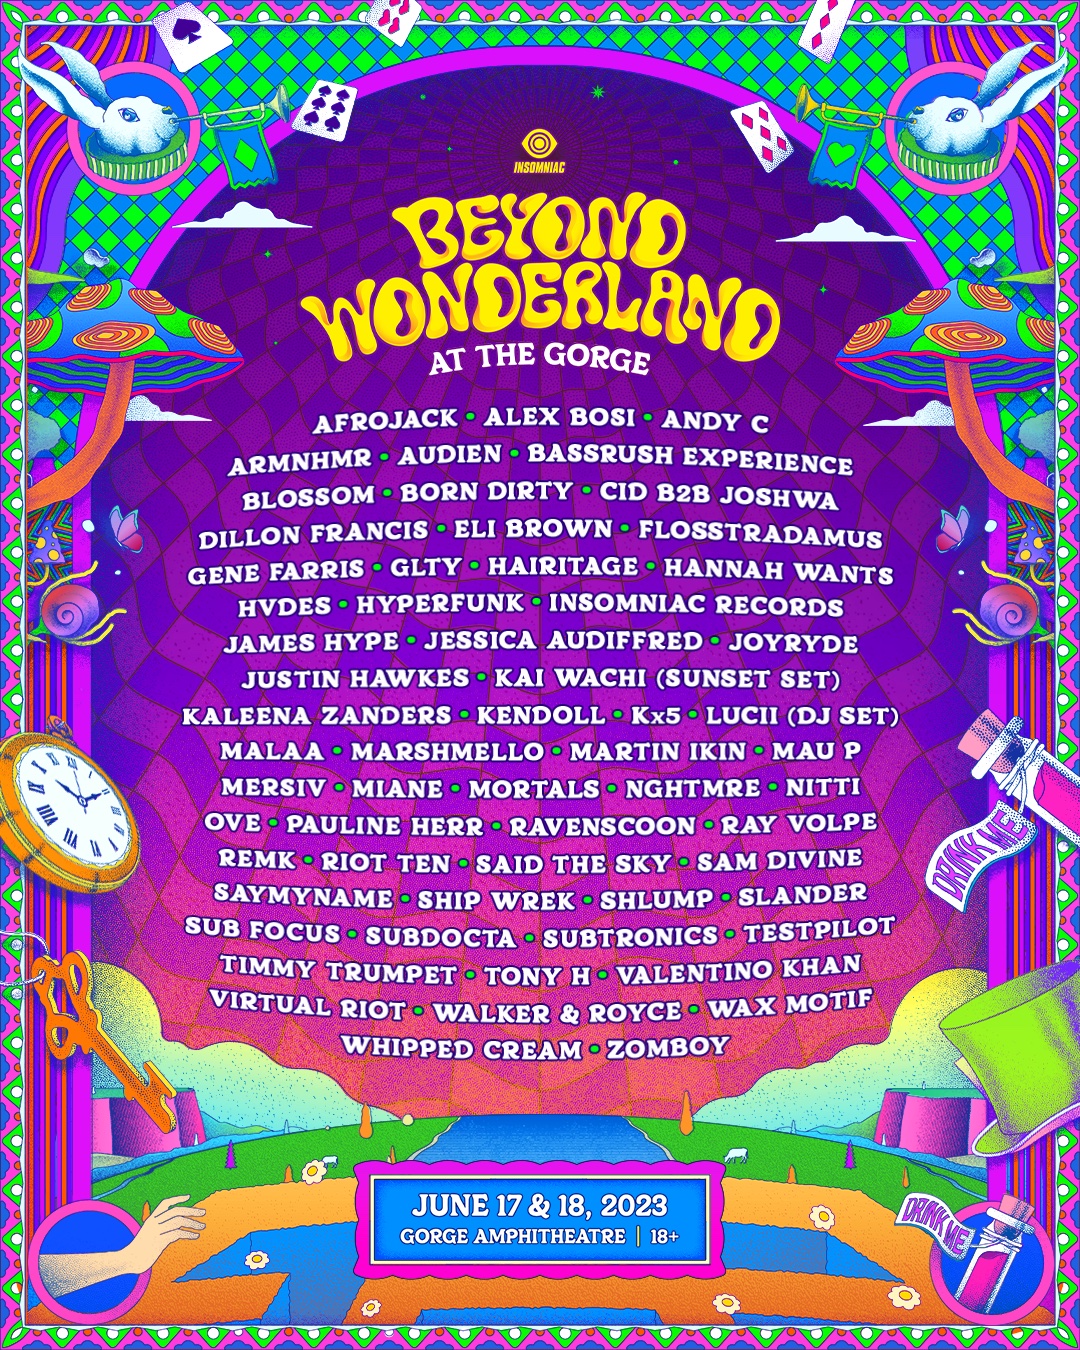 Festival Beyond Wonderland at The Seattle, Wash. tickets and